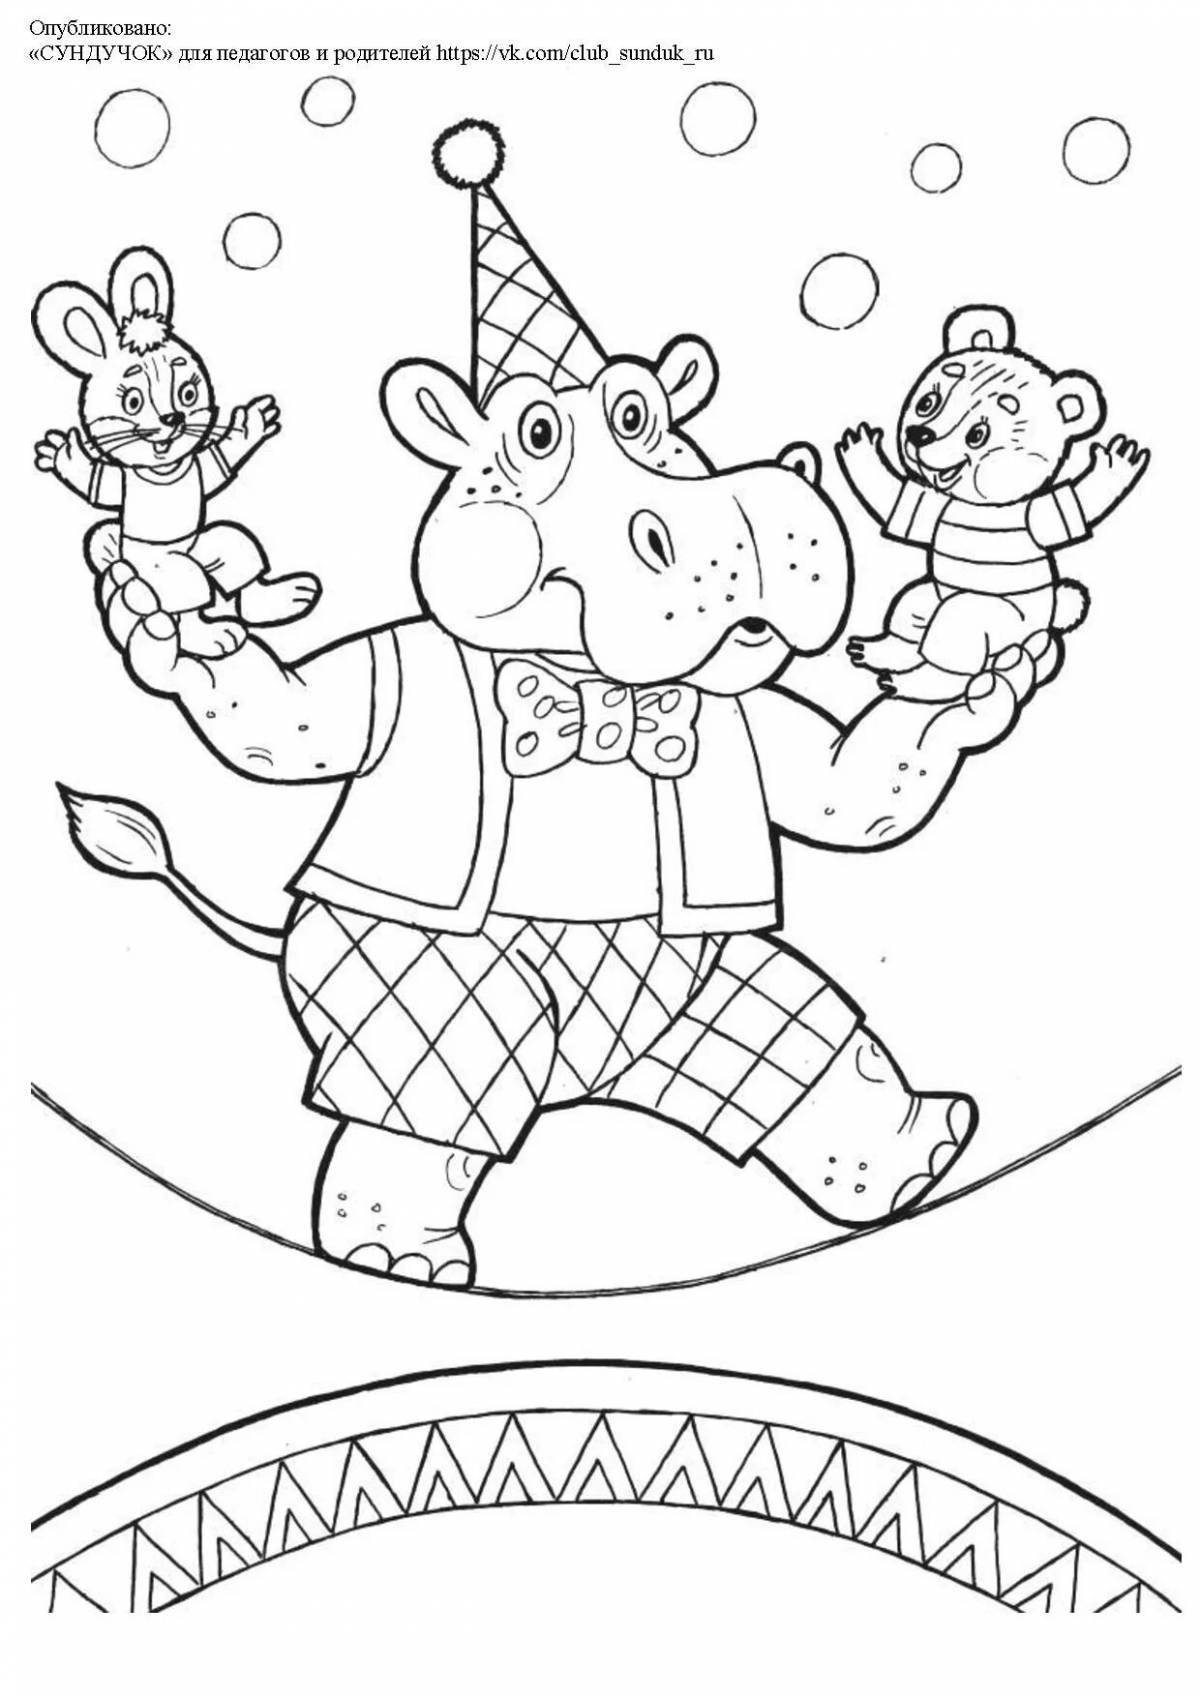 Playful theater poster coloring page